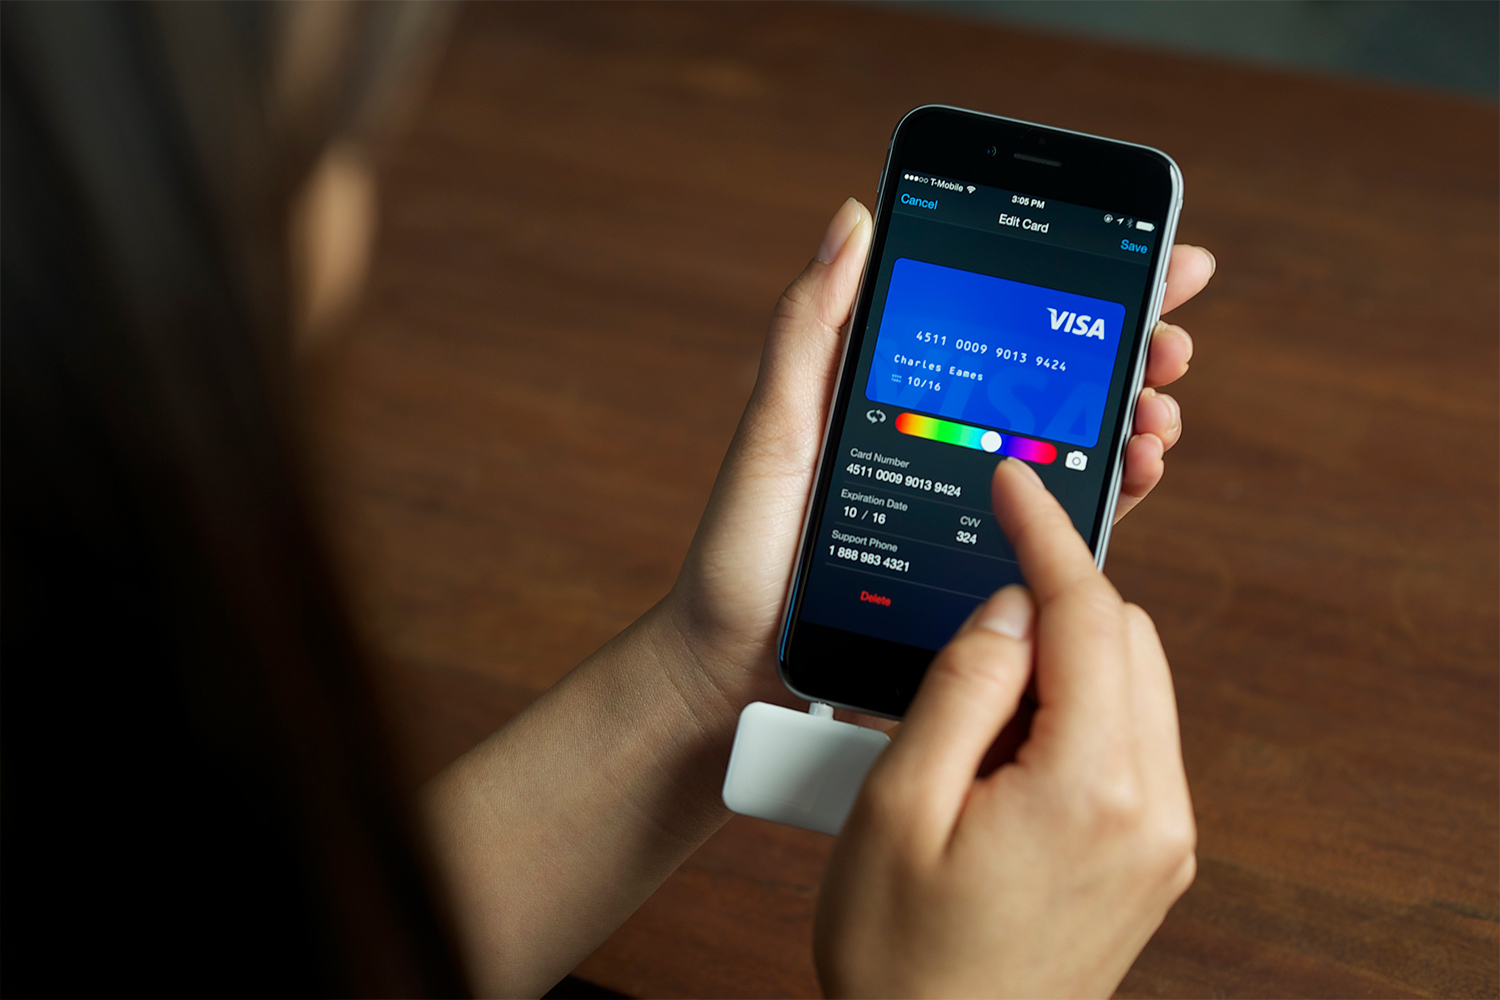 Coin 2.0 - Finally A Smart Card To Slim Your Wallet | Digital Trends